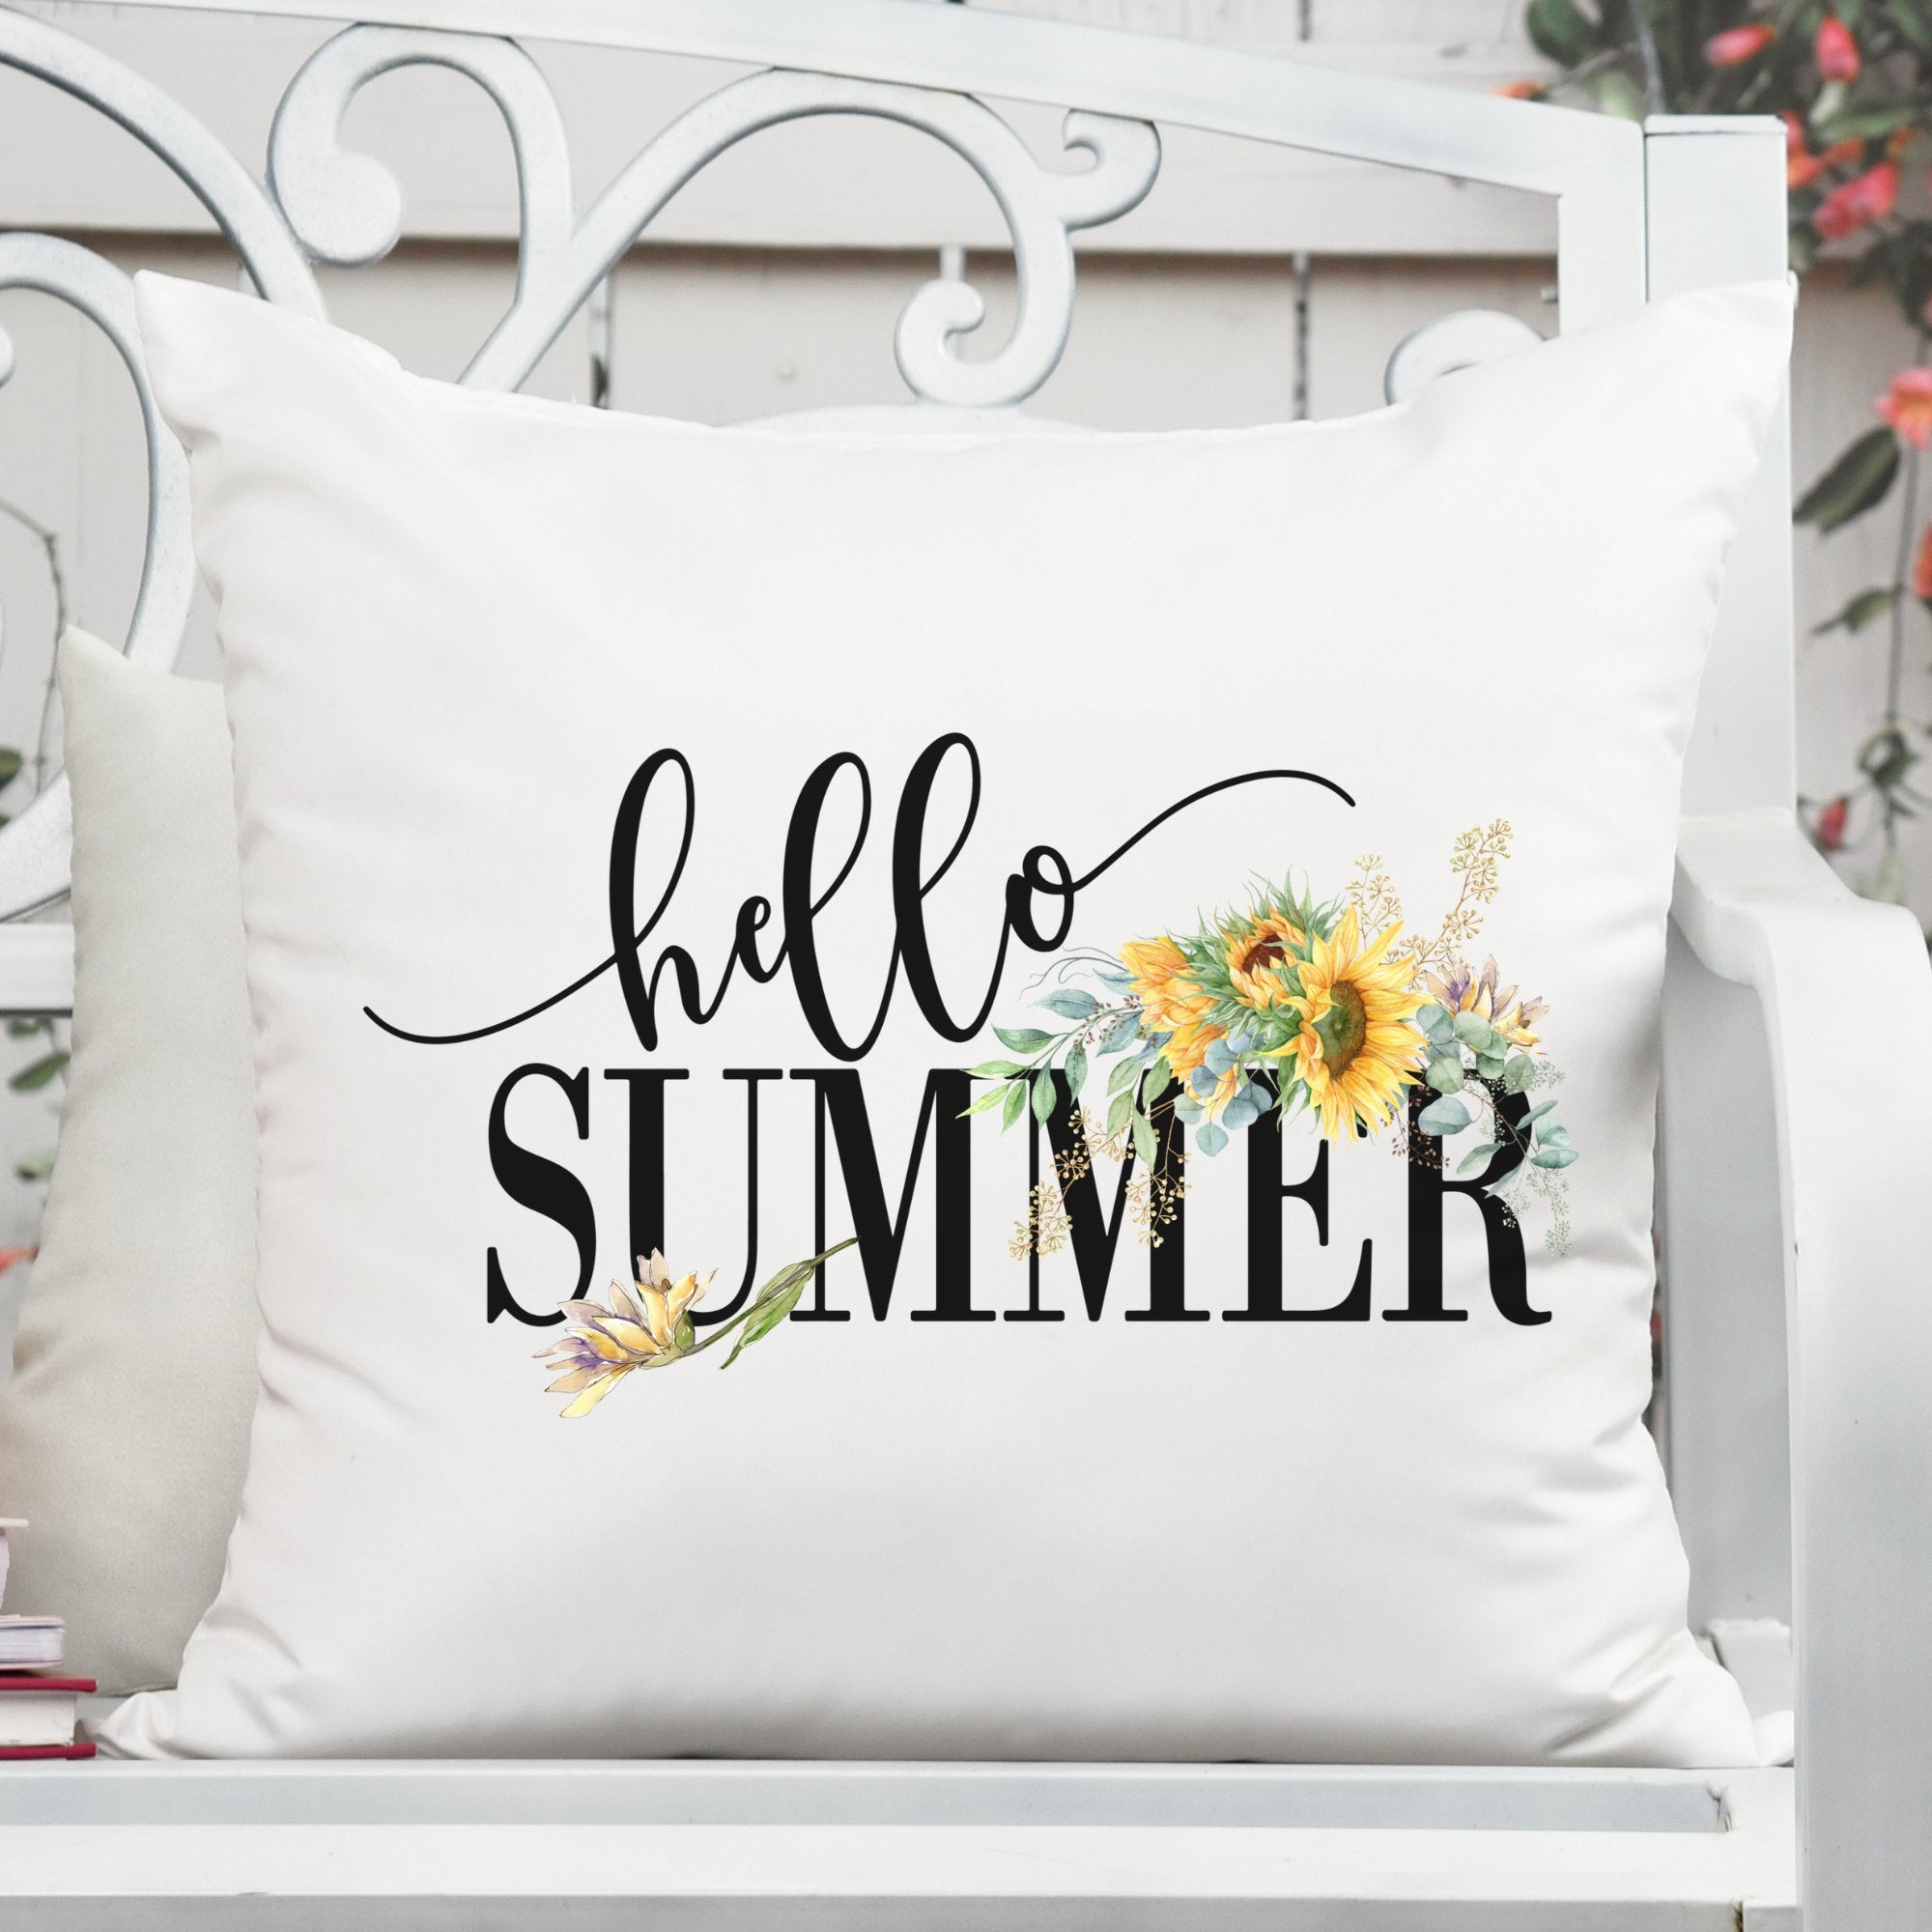 Hello Summer Pillow Cover - Trendznmore